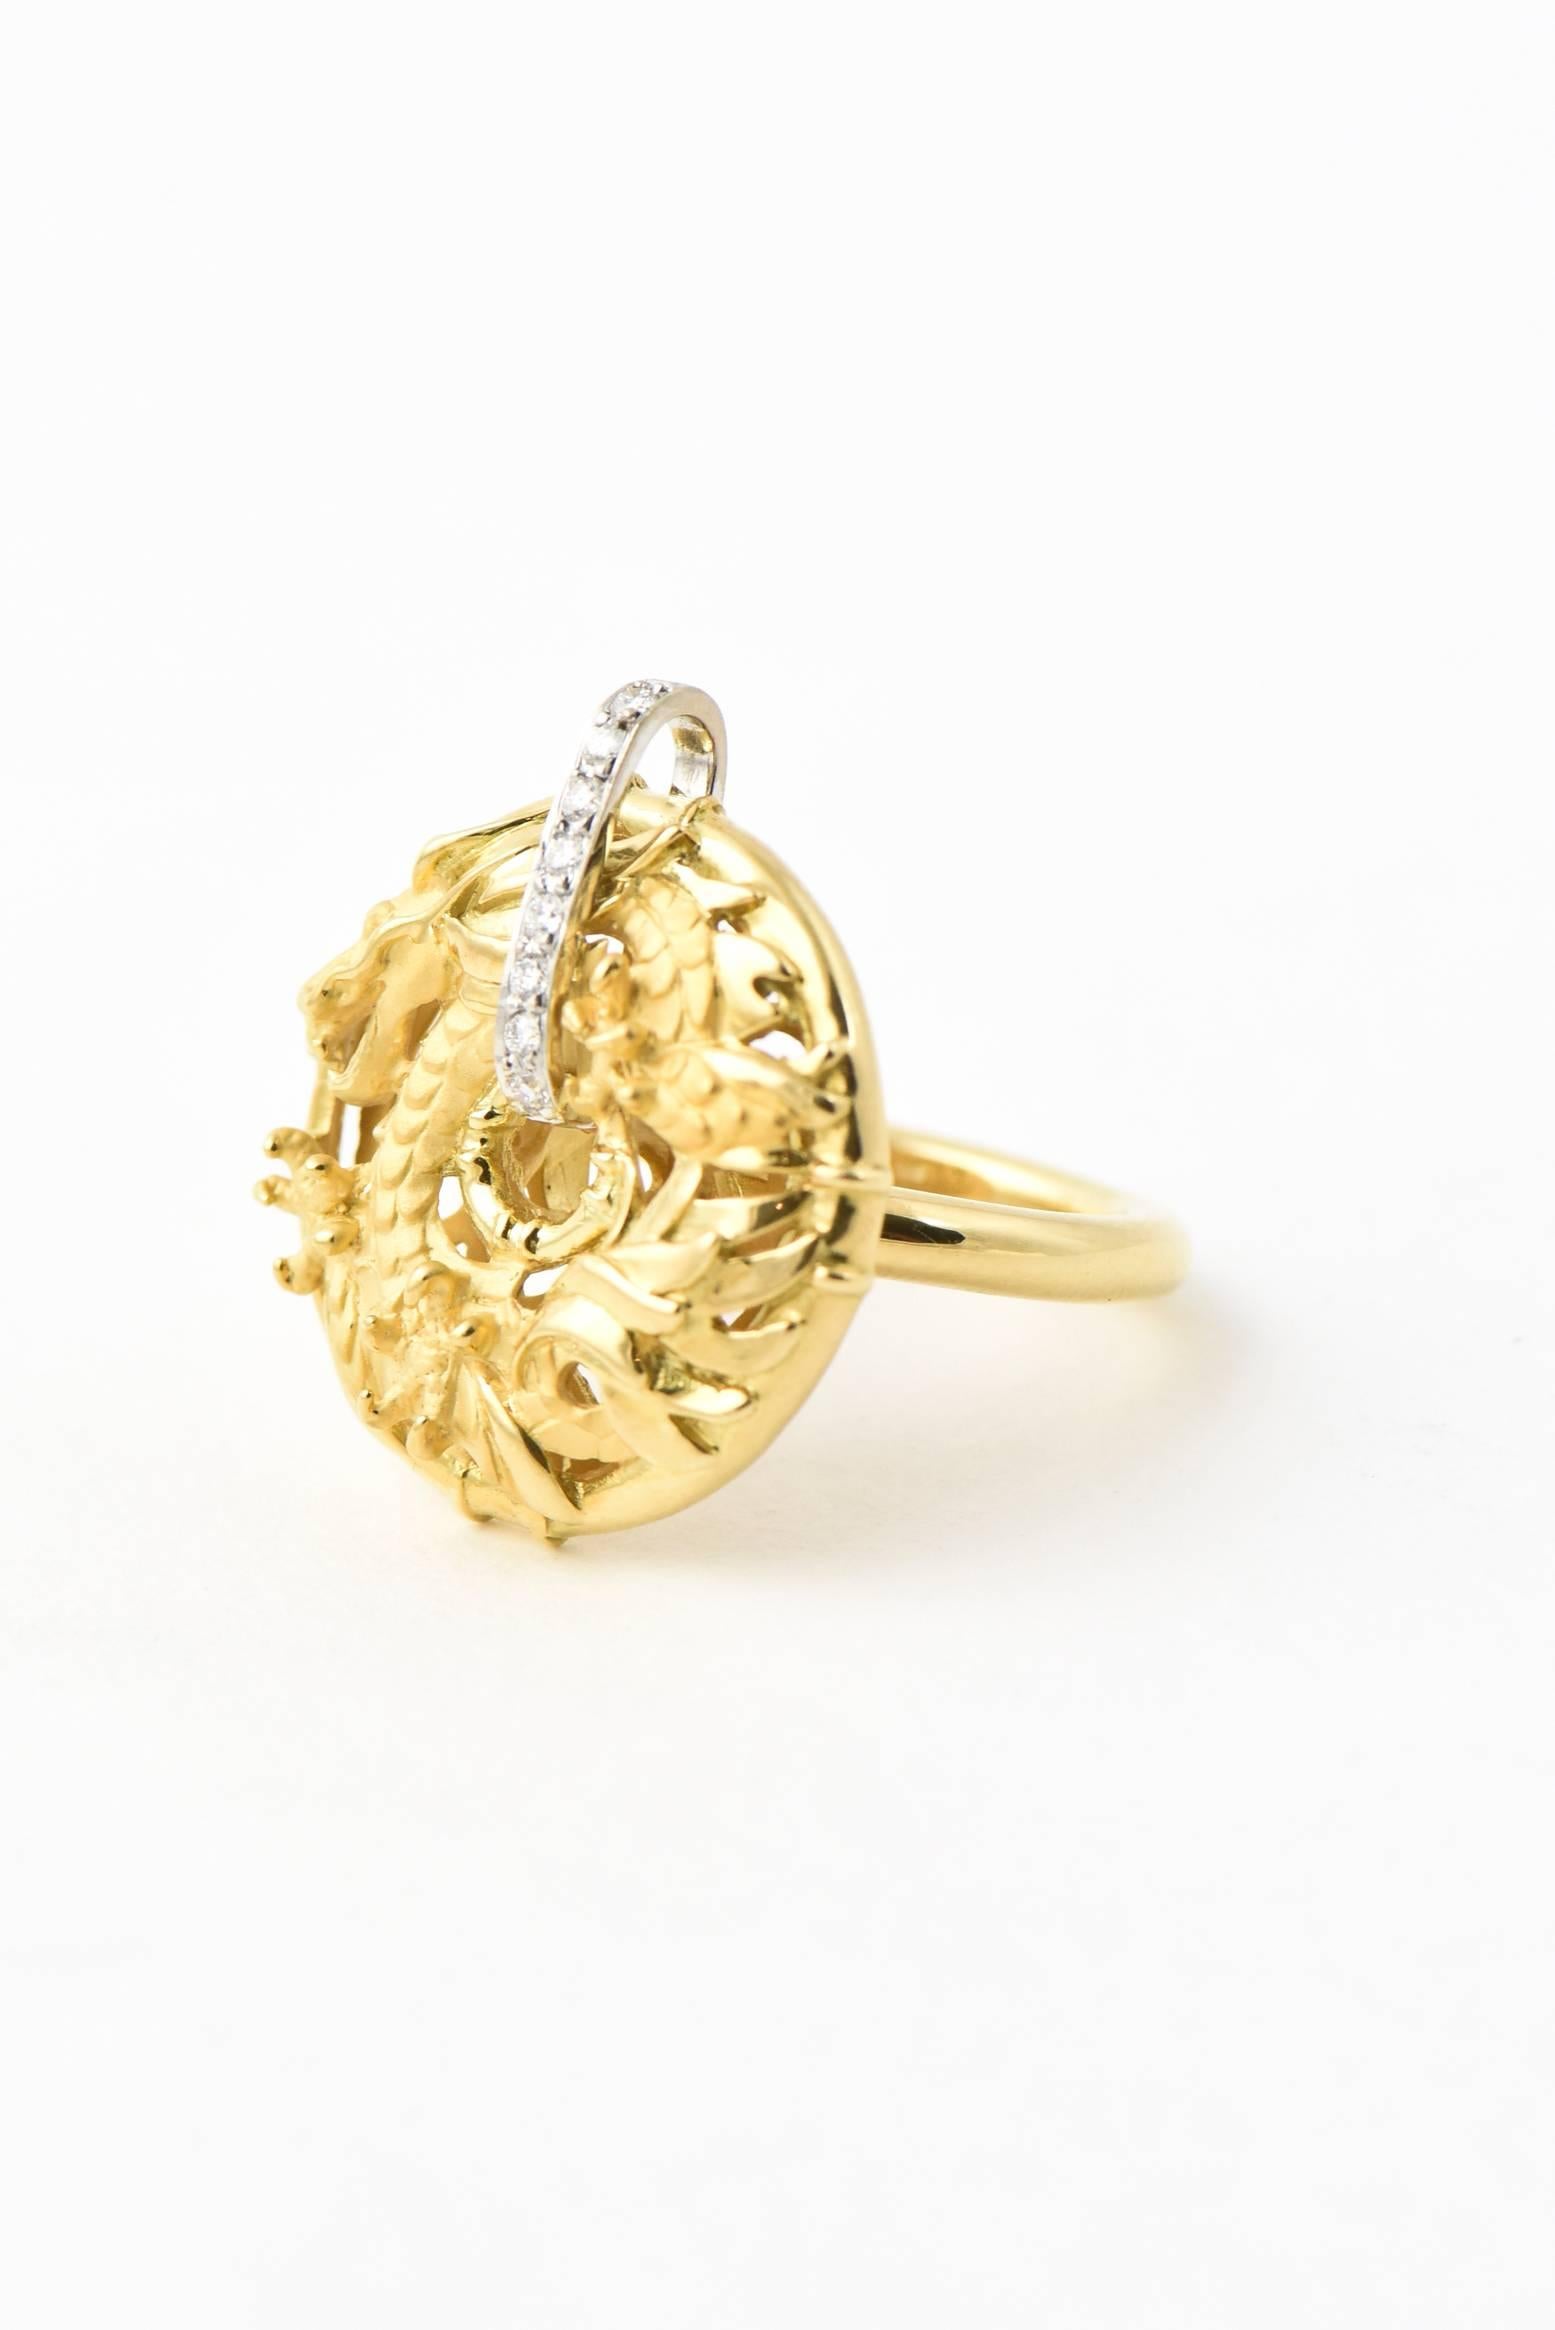 CARRERA Y CARERRA SHANGHAI RING 
CÍRCULOS DE FUEGO COLLECTION
Ring features an18k Circle with Dragon releaf & diamond accents in yellow & white gold.

